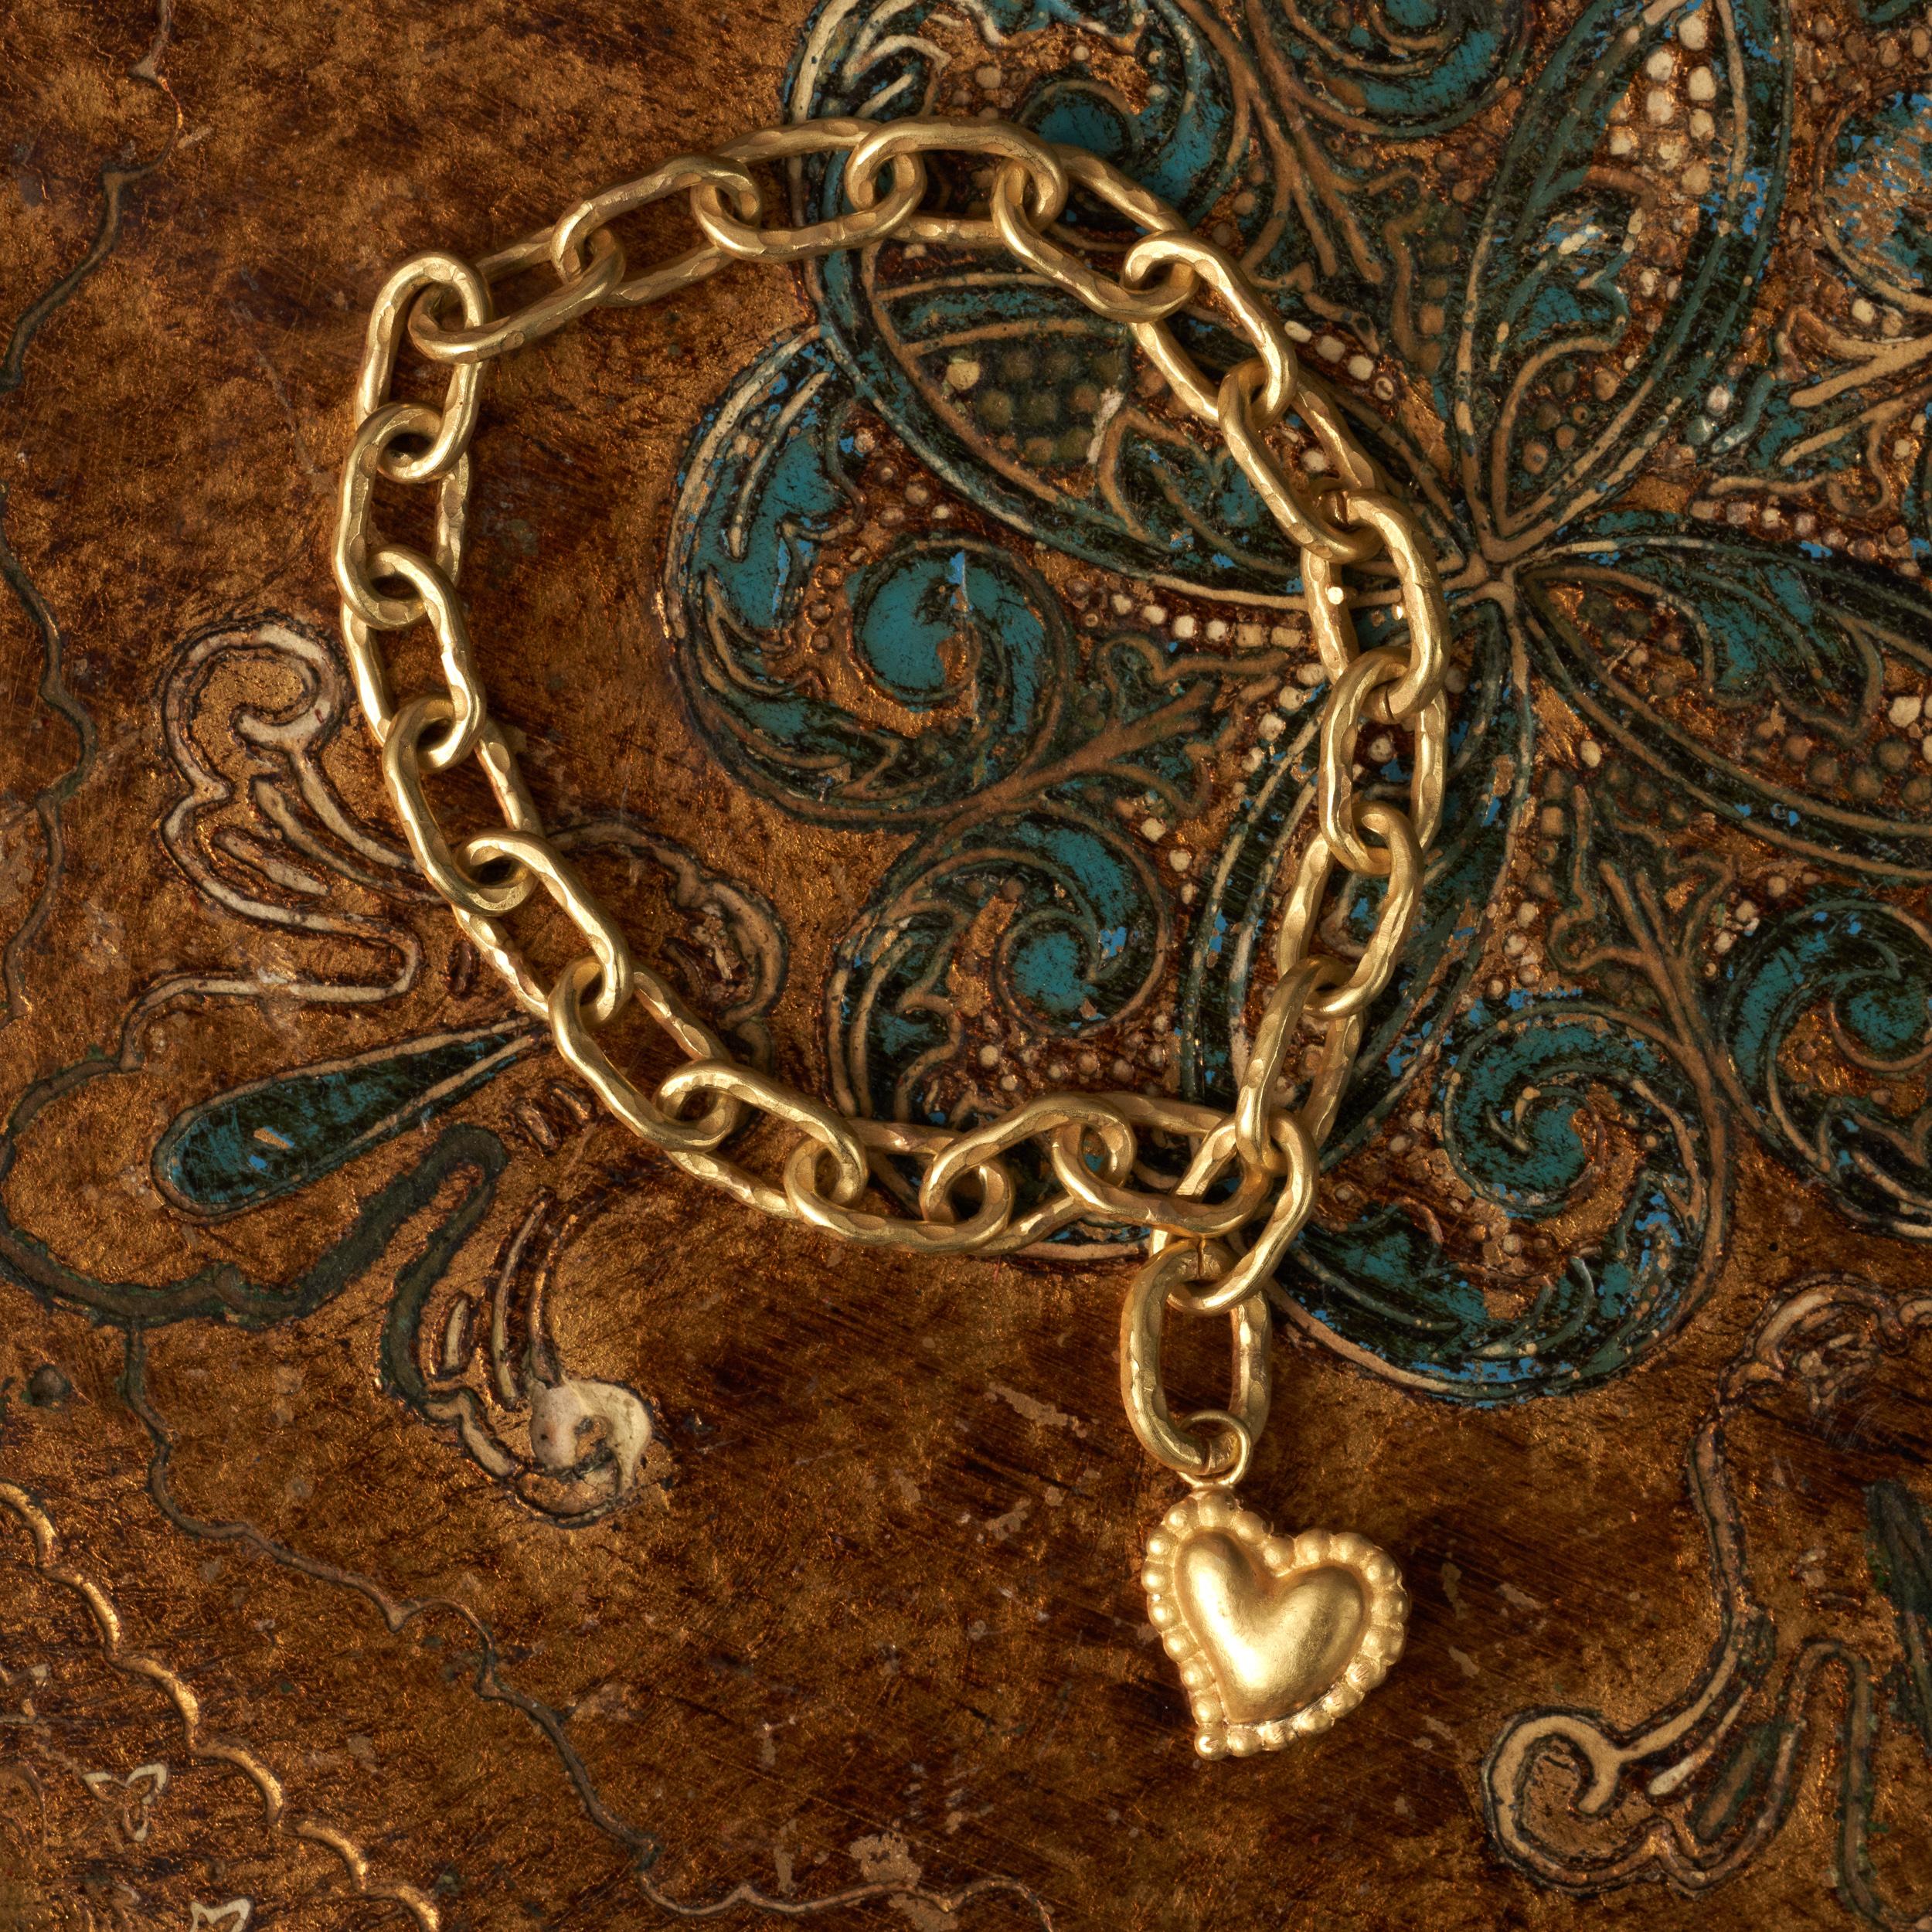 Heavy 18kt gold hand hammered link chain with a hidden click looped fastening. Hangs with a detachable solid 18kt gold scared heart pendant. The chain measures 7”.

Symbolism:
The sacred heart symbolises eternal, undying love and